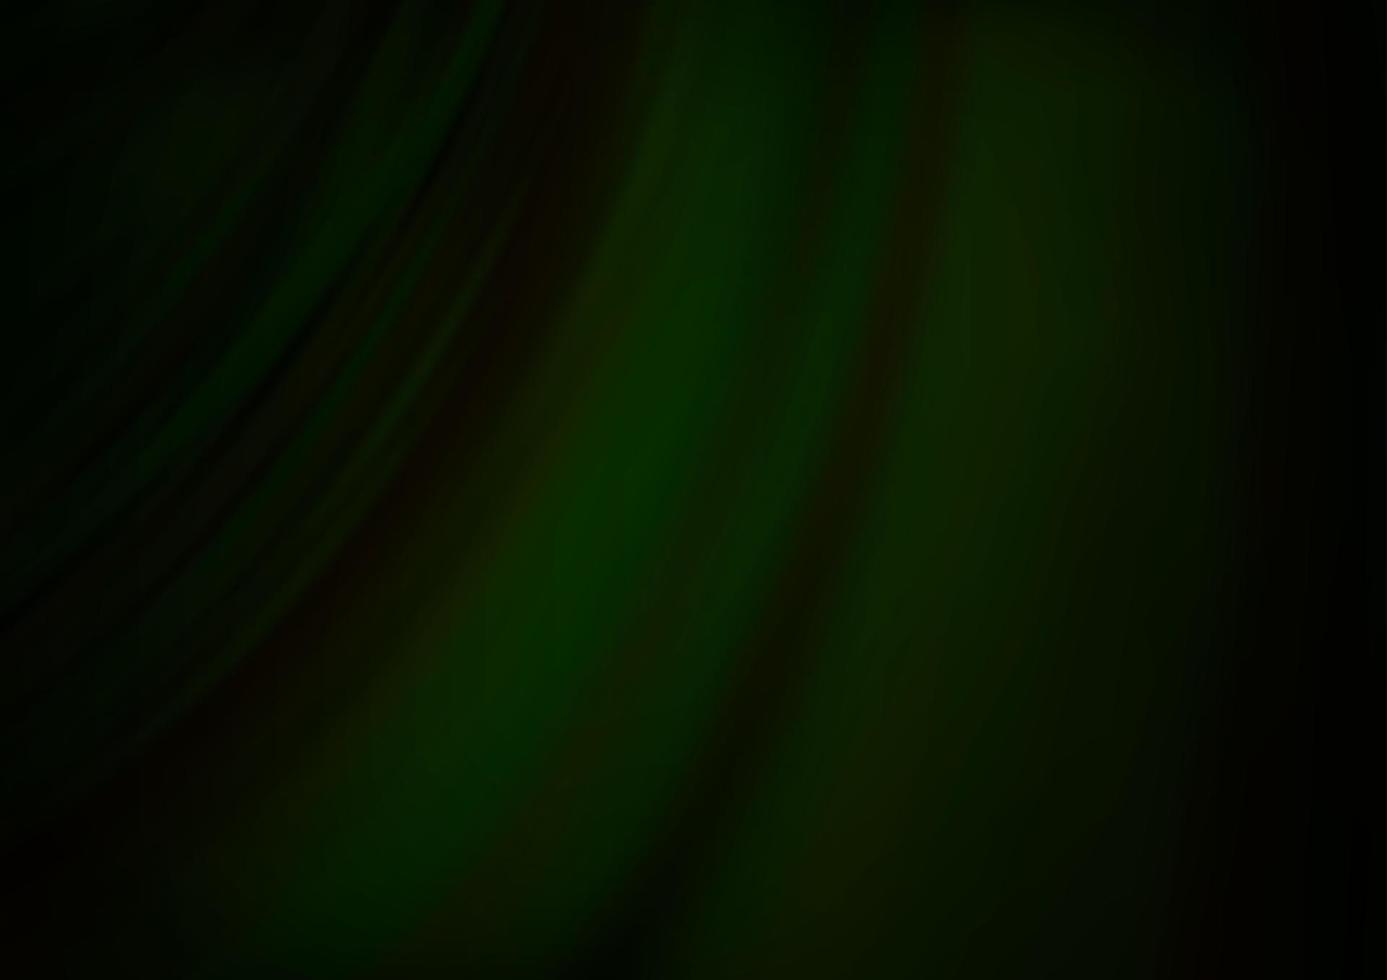 Dark Green vector background with curved circles.